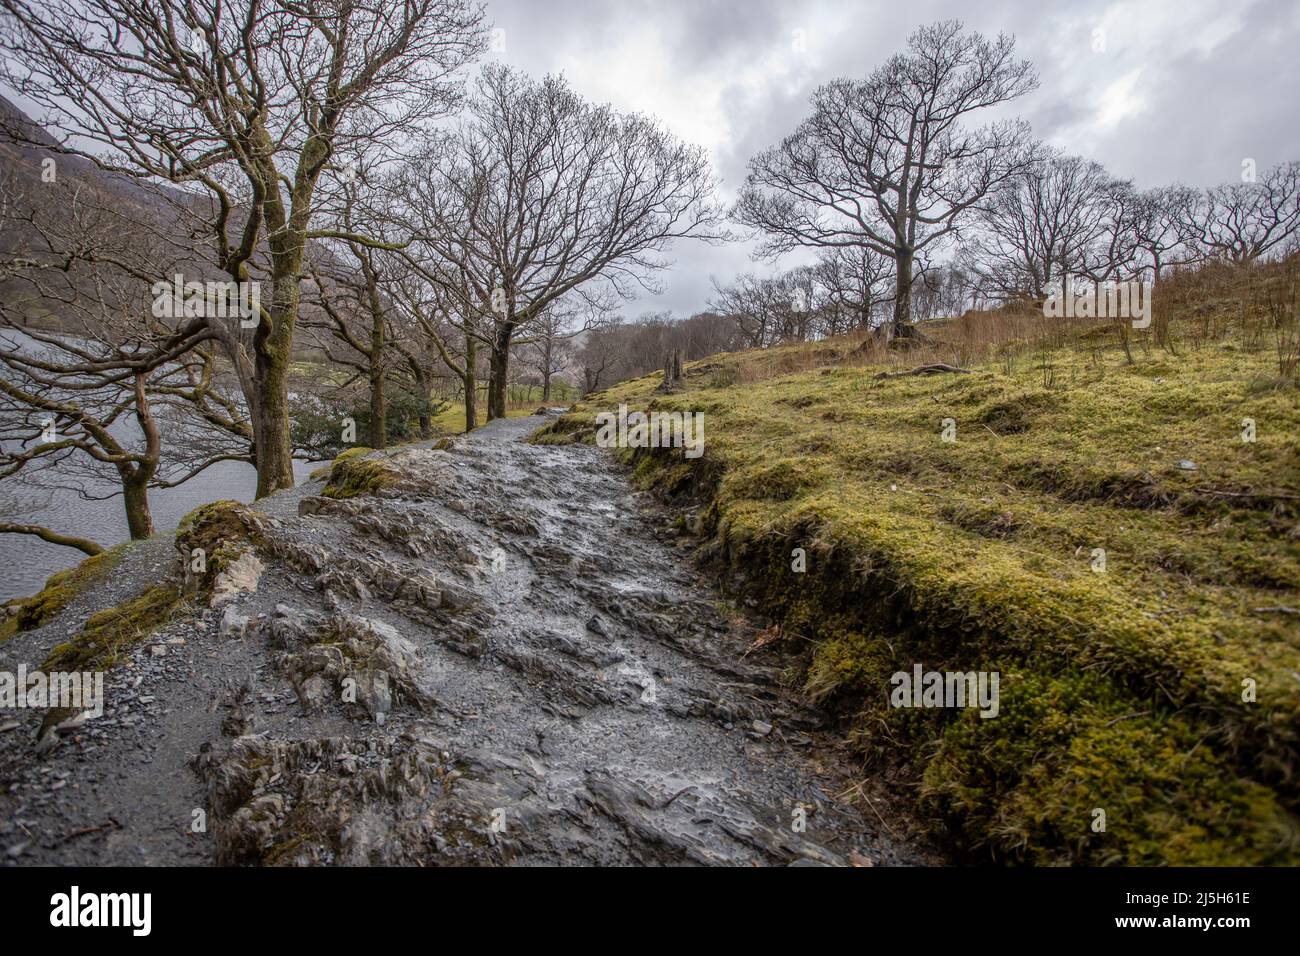 Landscape Images at the Lake District National Park in Cumbria - United Kingdom Stock Photo